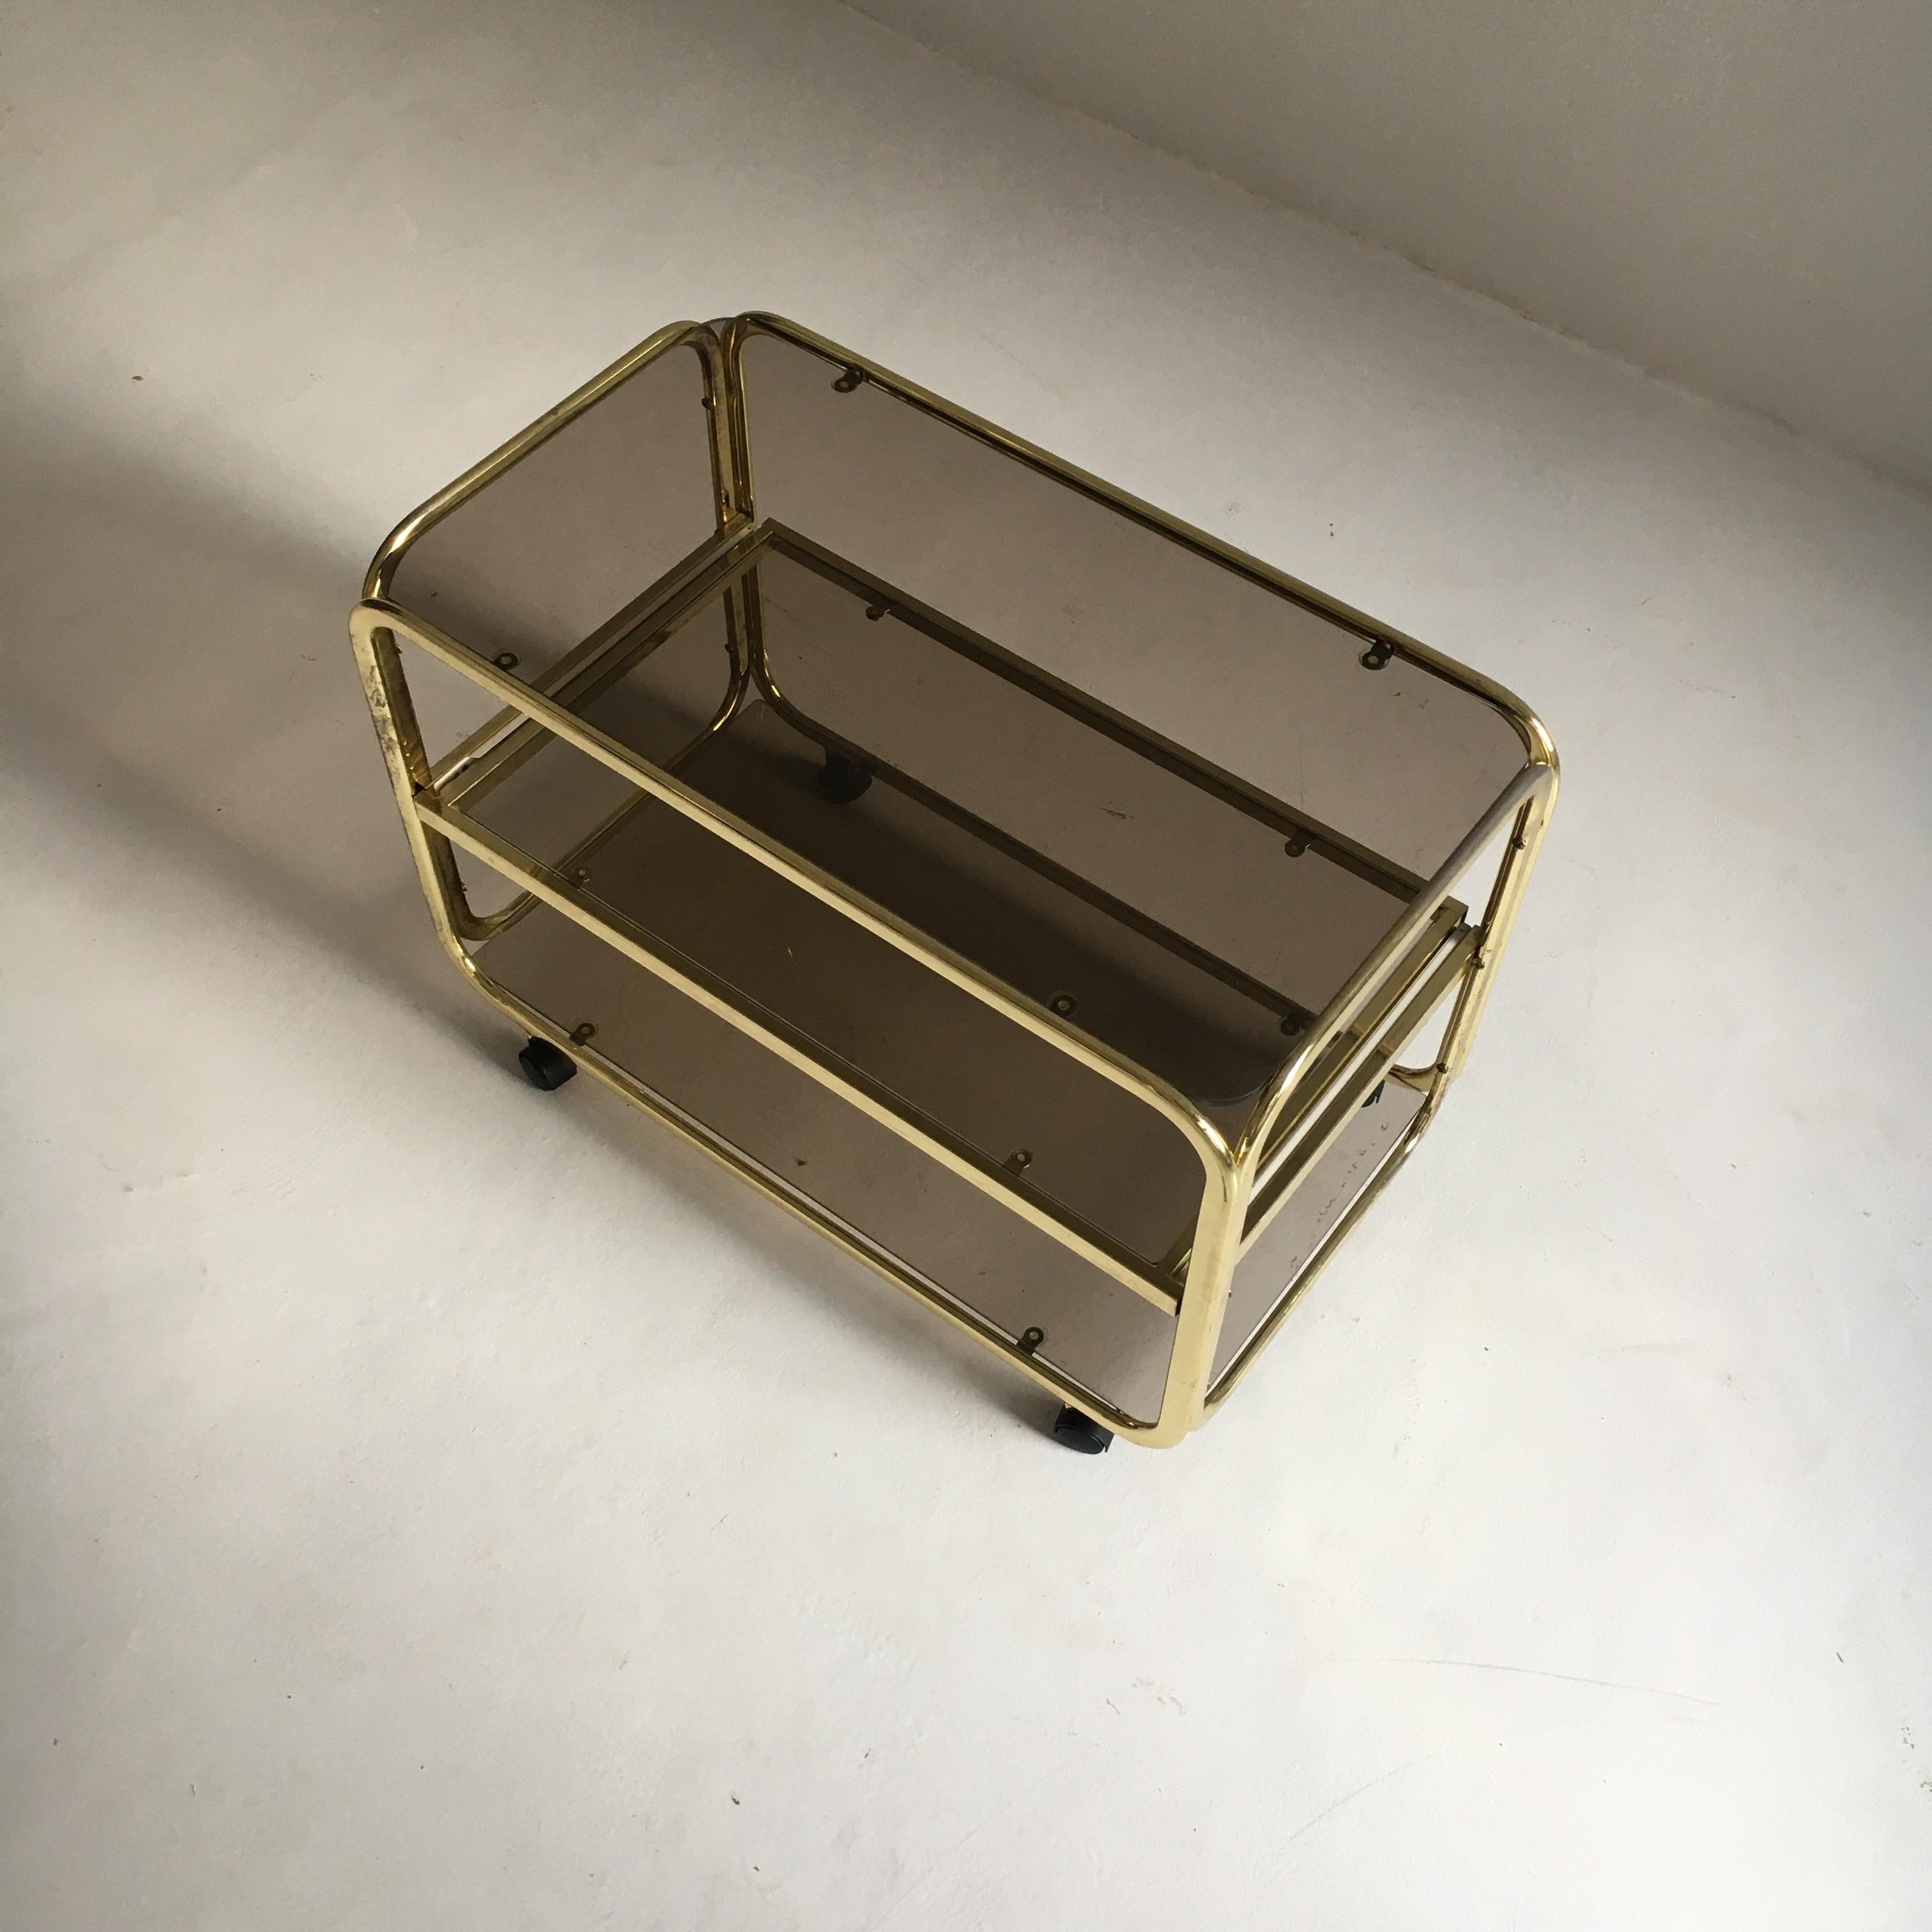 Late 20th Century Vintage Brass Plated Bar Cart Table Brown Smoked Glass Plates by Morex, 1970s For Sale